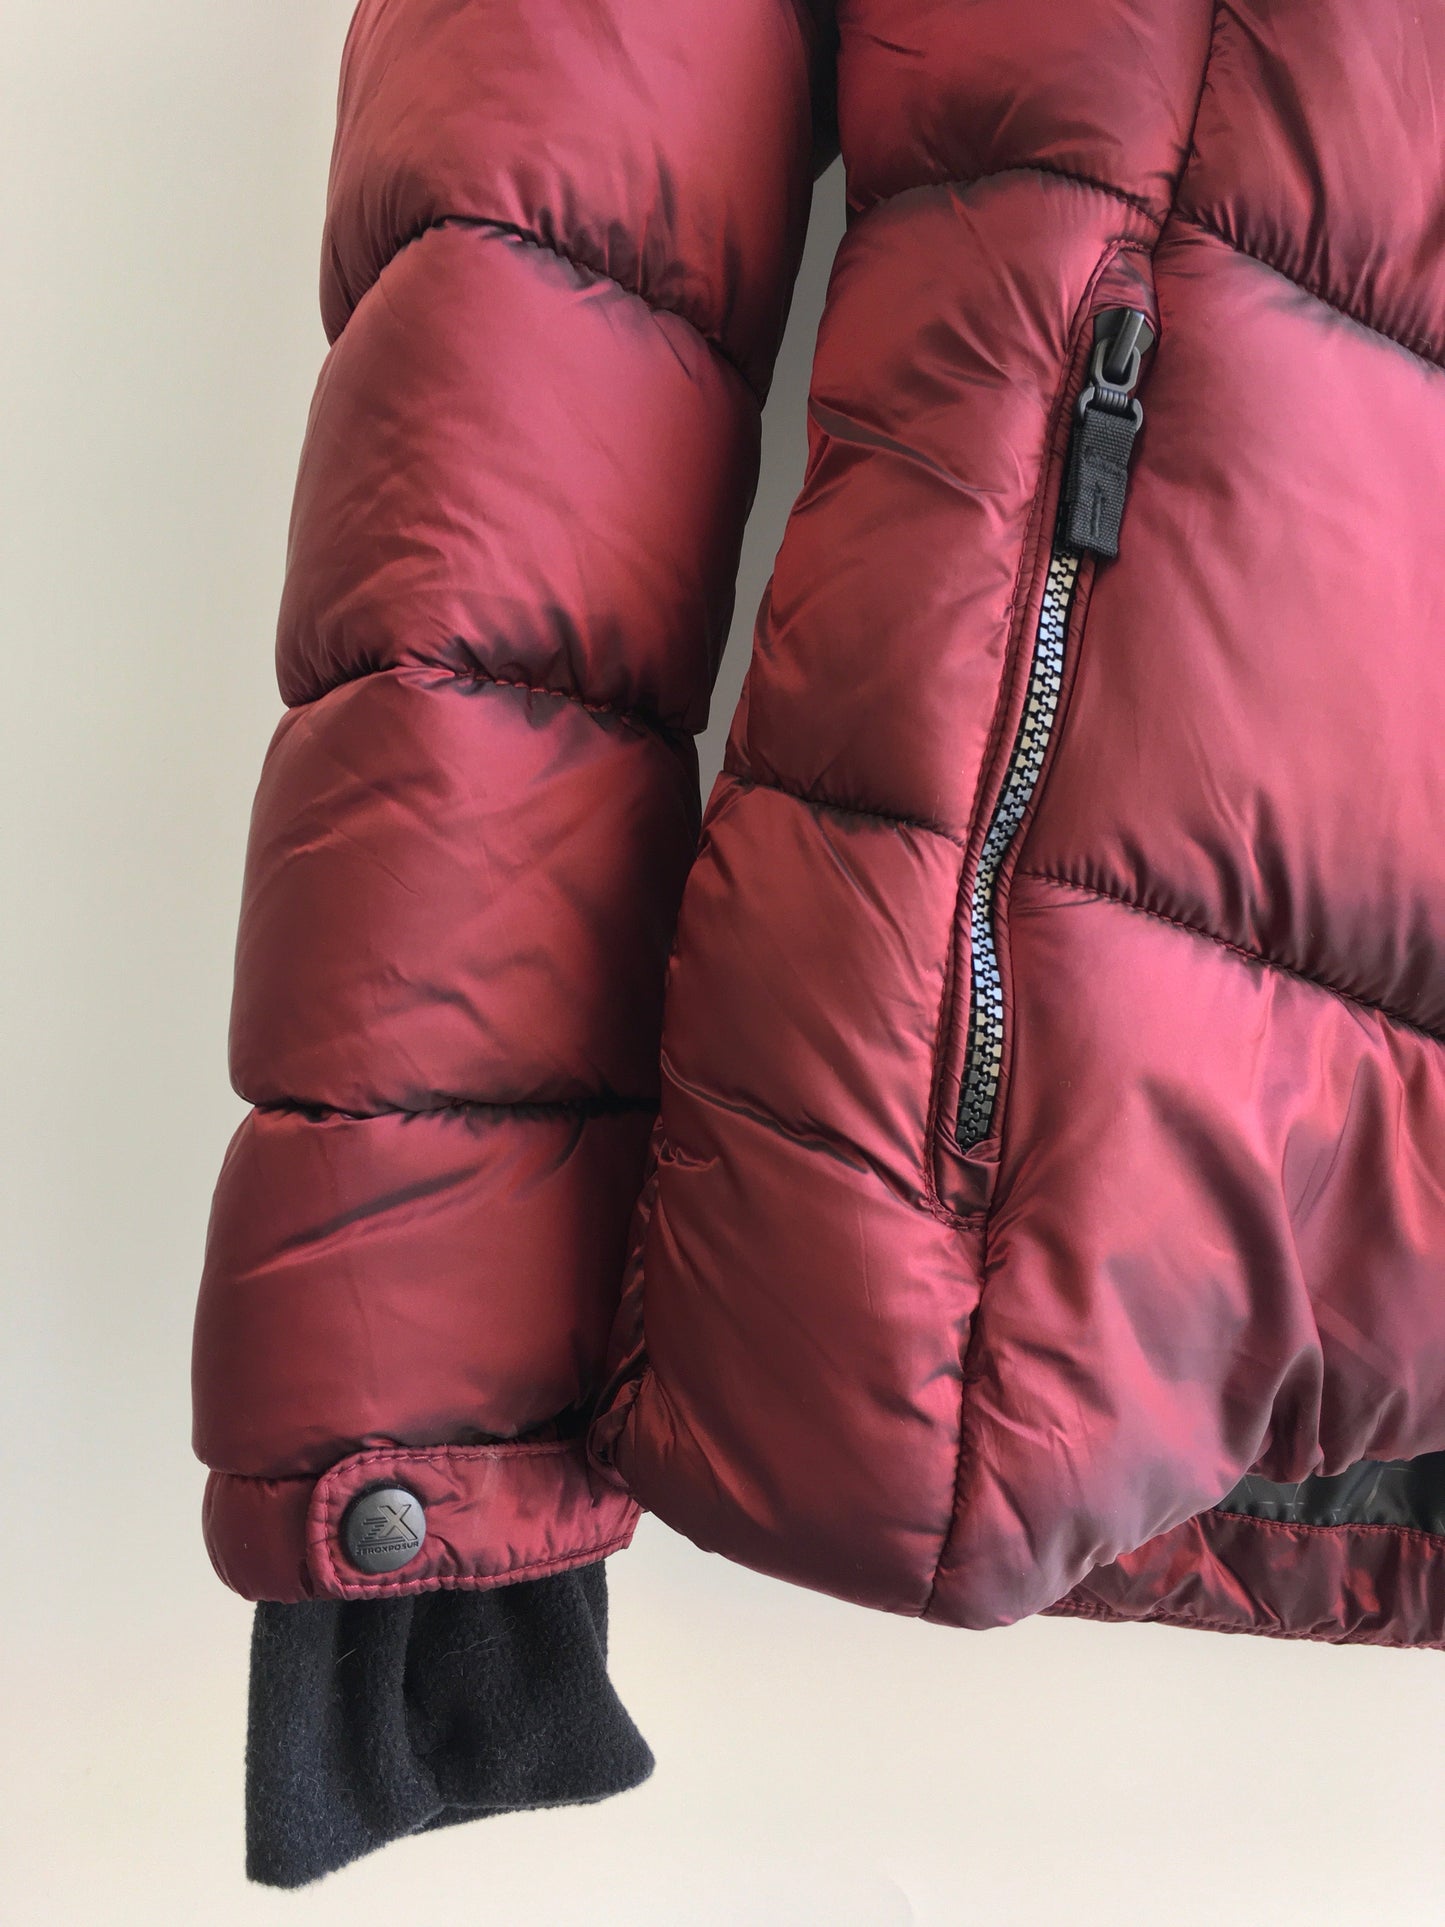 Coat Puffer & Quilted By Zero Xposure  Size: S